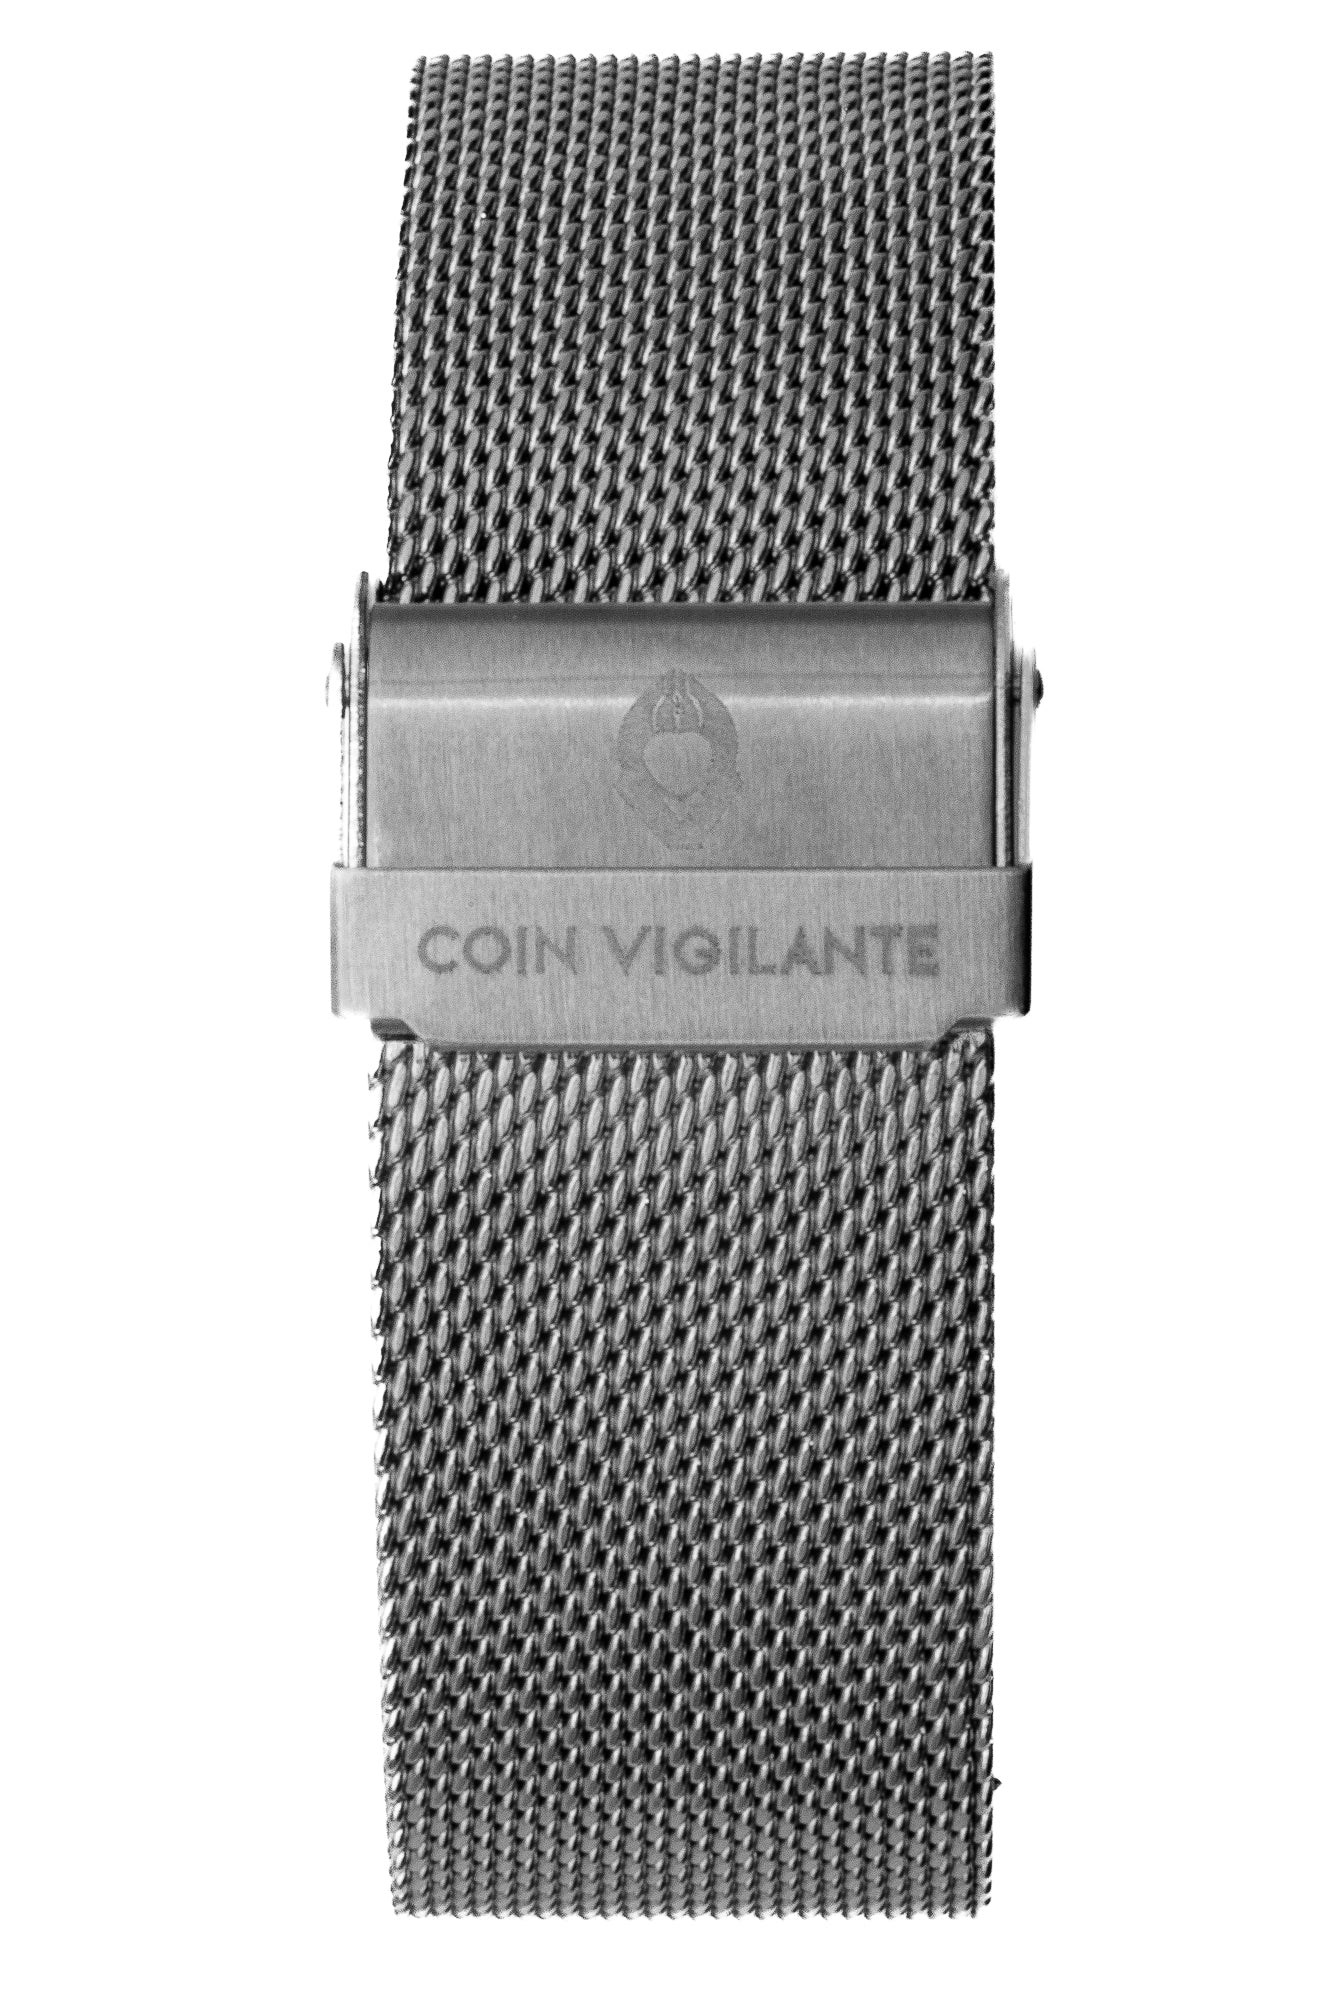 22MM Coin Vigilante Silver Stainless Steel Mesh Band